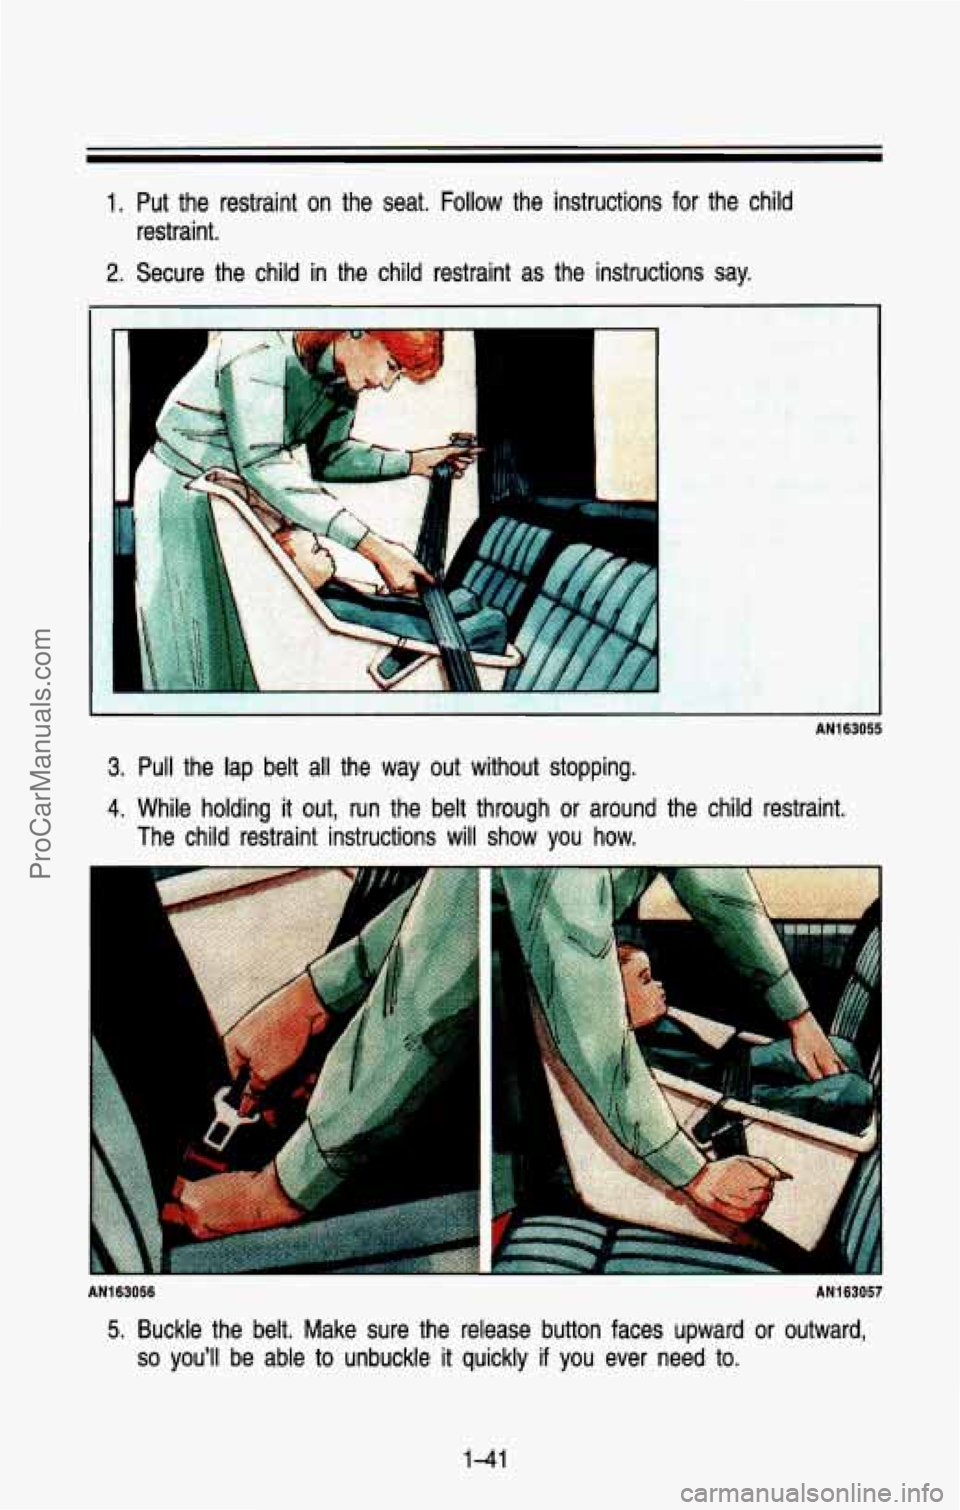 CHEVROLET SUBURBAN 1993  Owners Manual 1. Put  the  restraint  on  the  seat. Follow the  instructions  for  the  child 
2. Secure  the  child in the  child  restraint  as  the  instructions  say. 
restraint. 
3. Pull  the  lap  belt 
all 